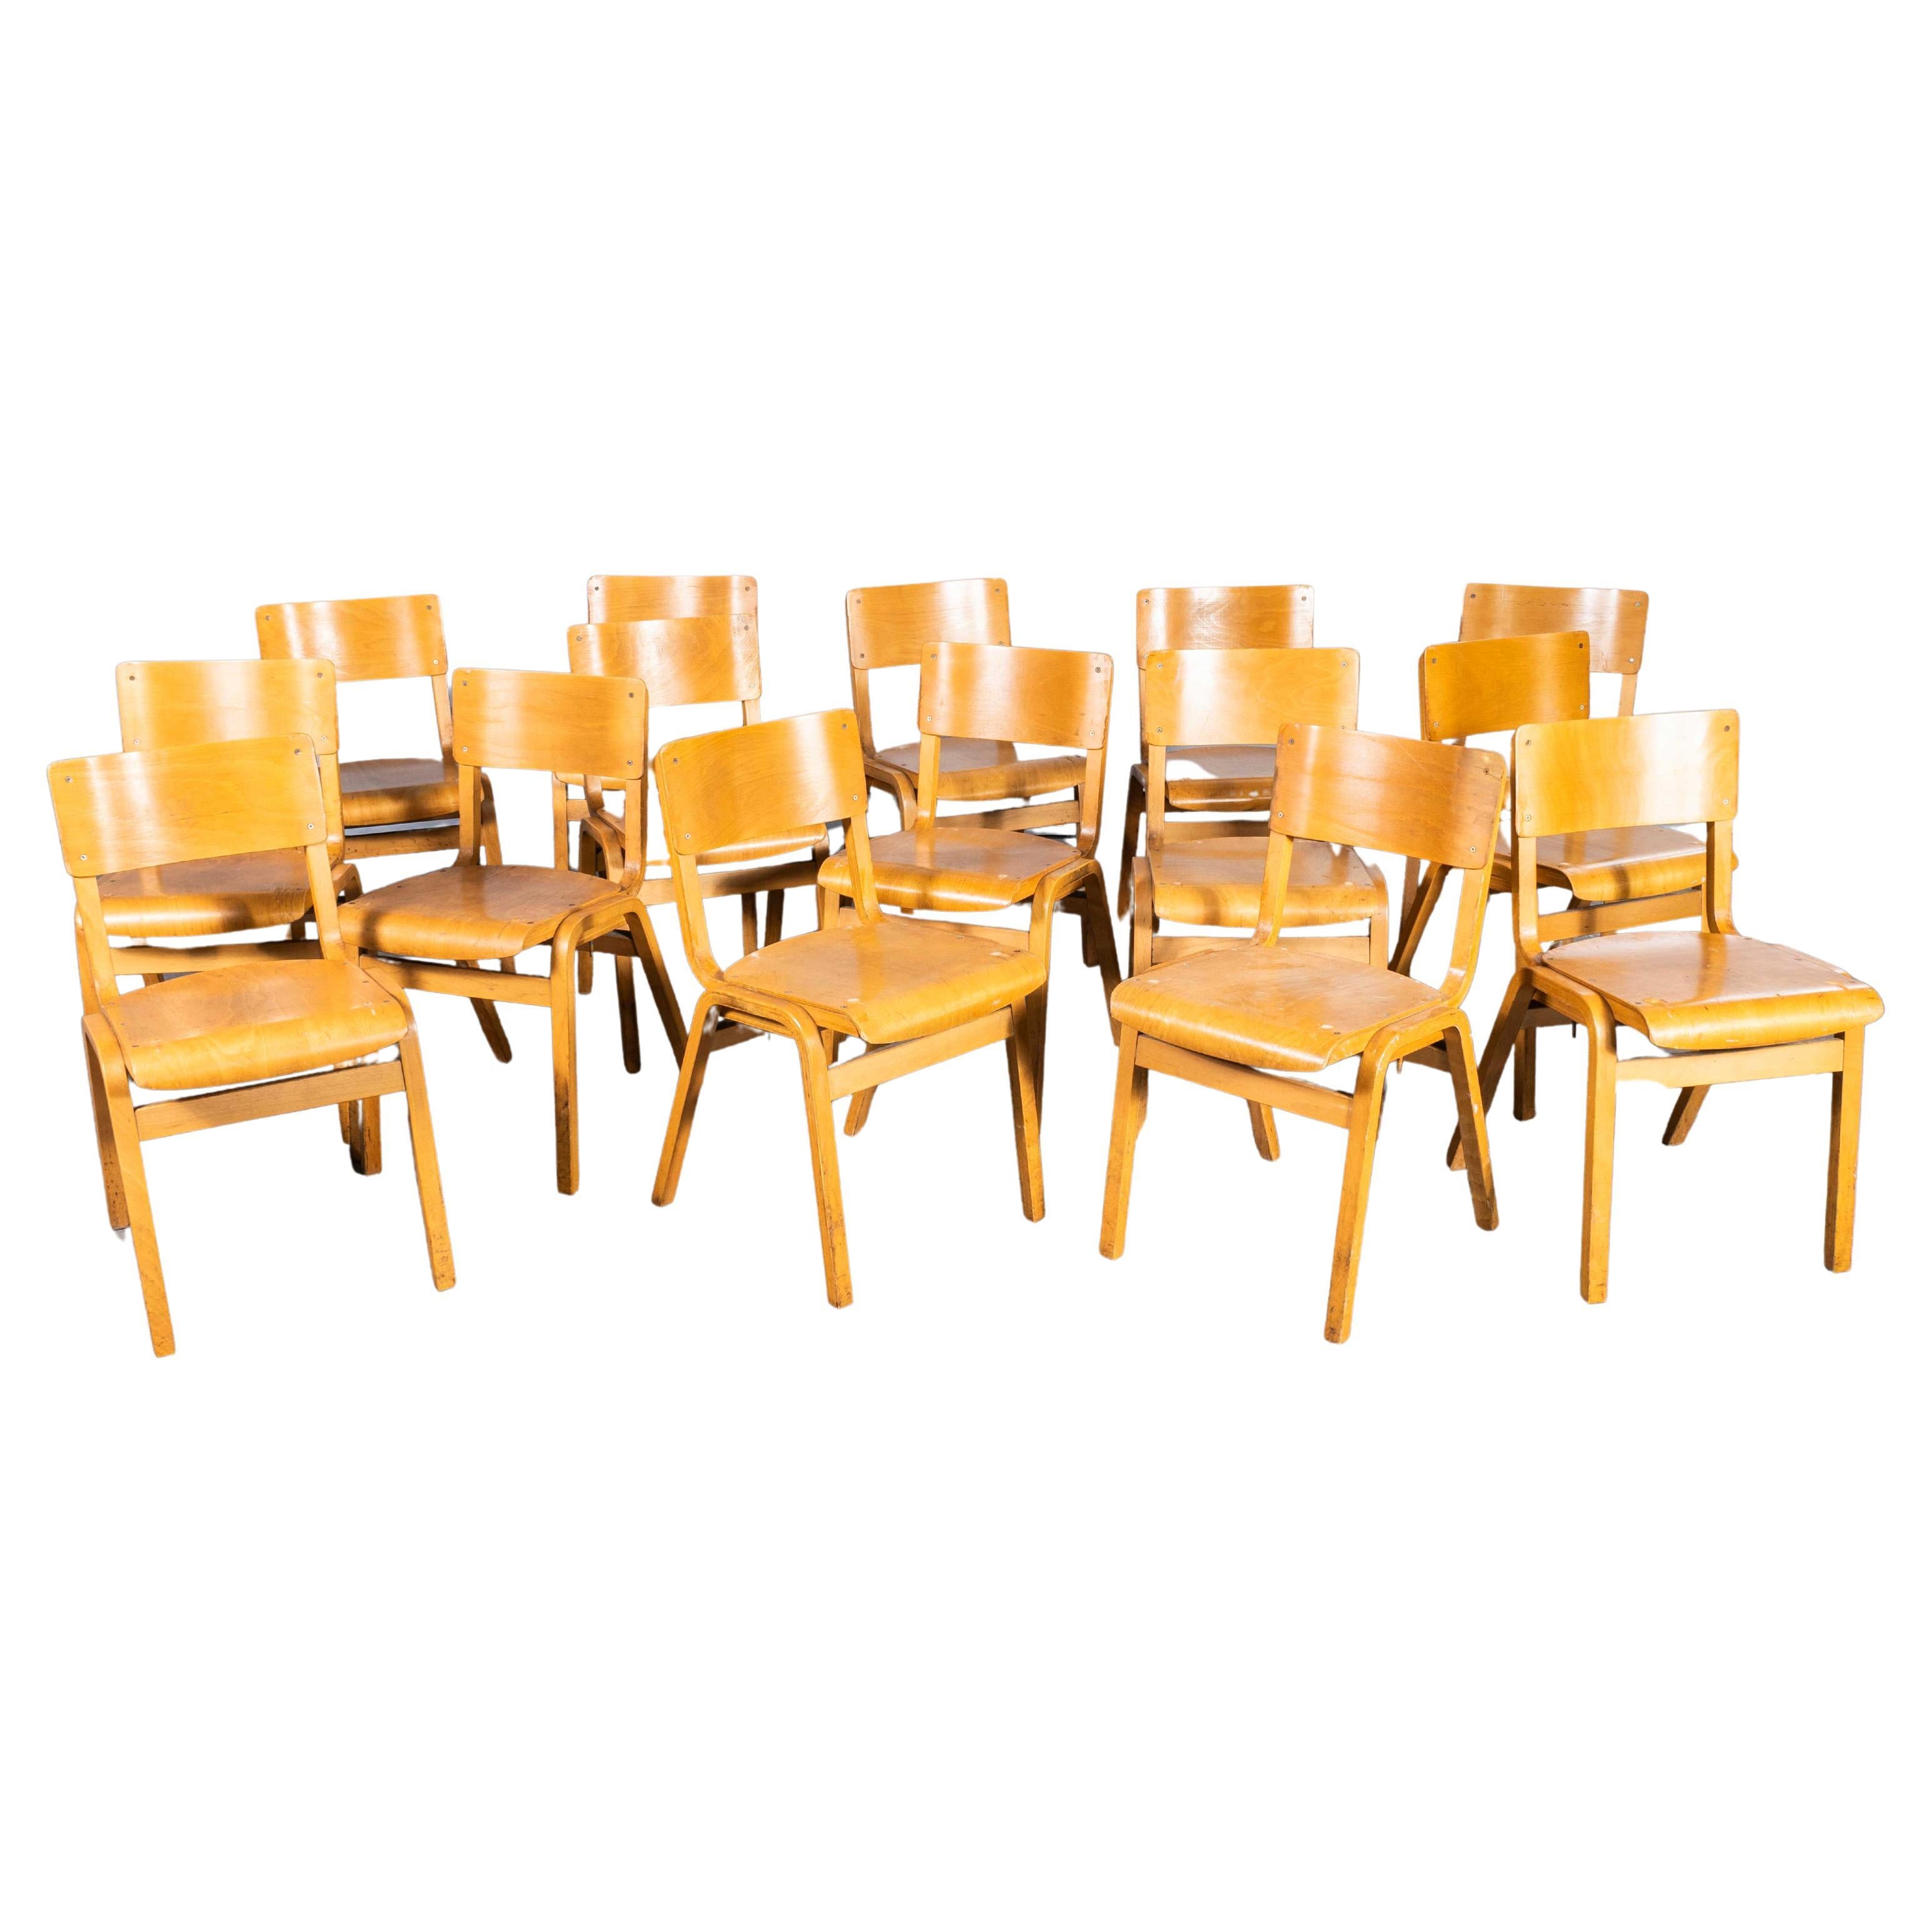 1950's Lamstak Beech Stacking Dining Chairs - Large Volume Available